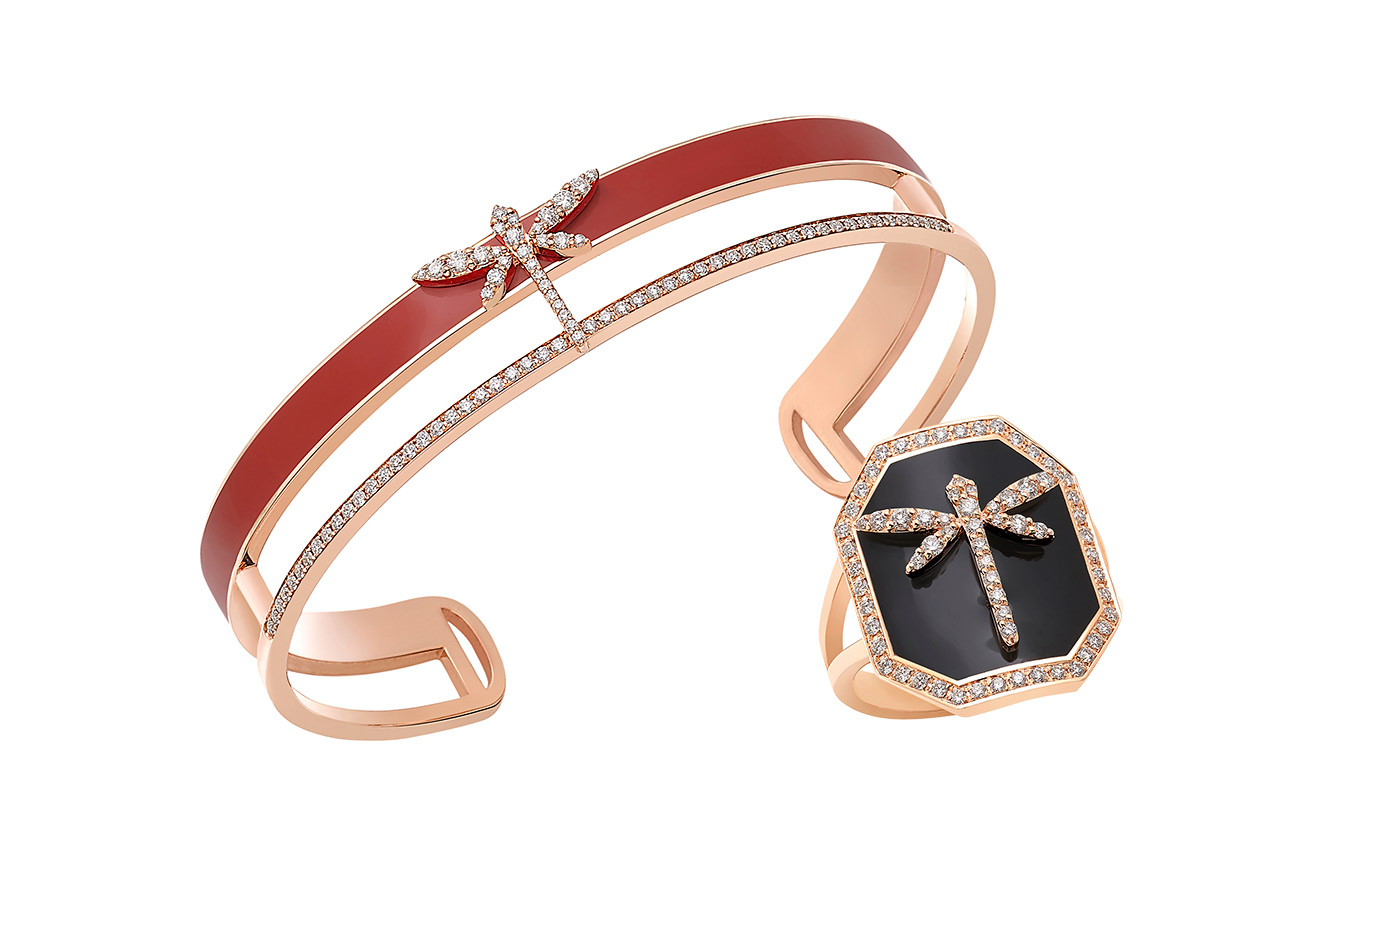 Anapsara 1926 Dragonfly cuff and ring with diamonds and enamel in rose gold